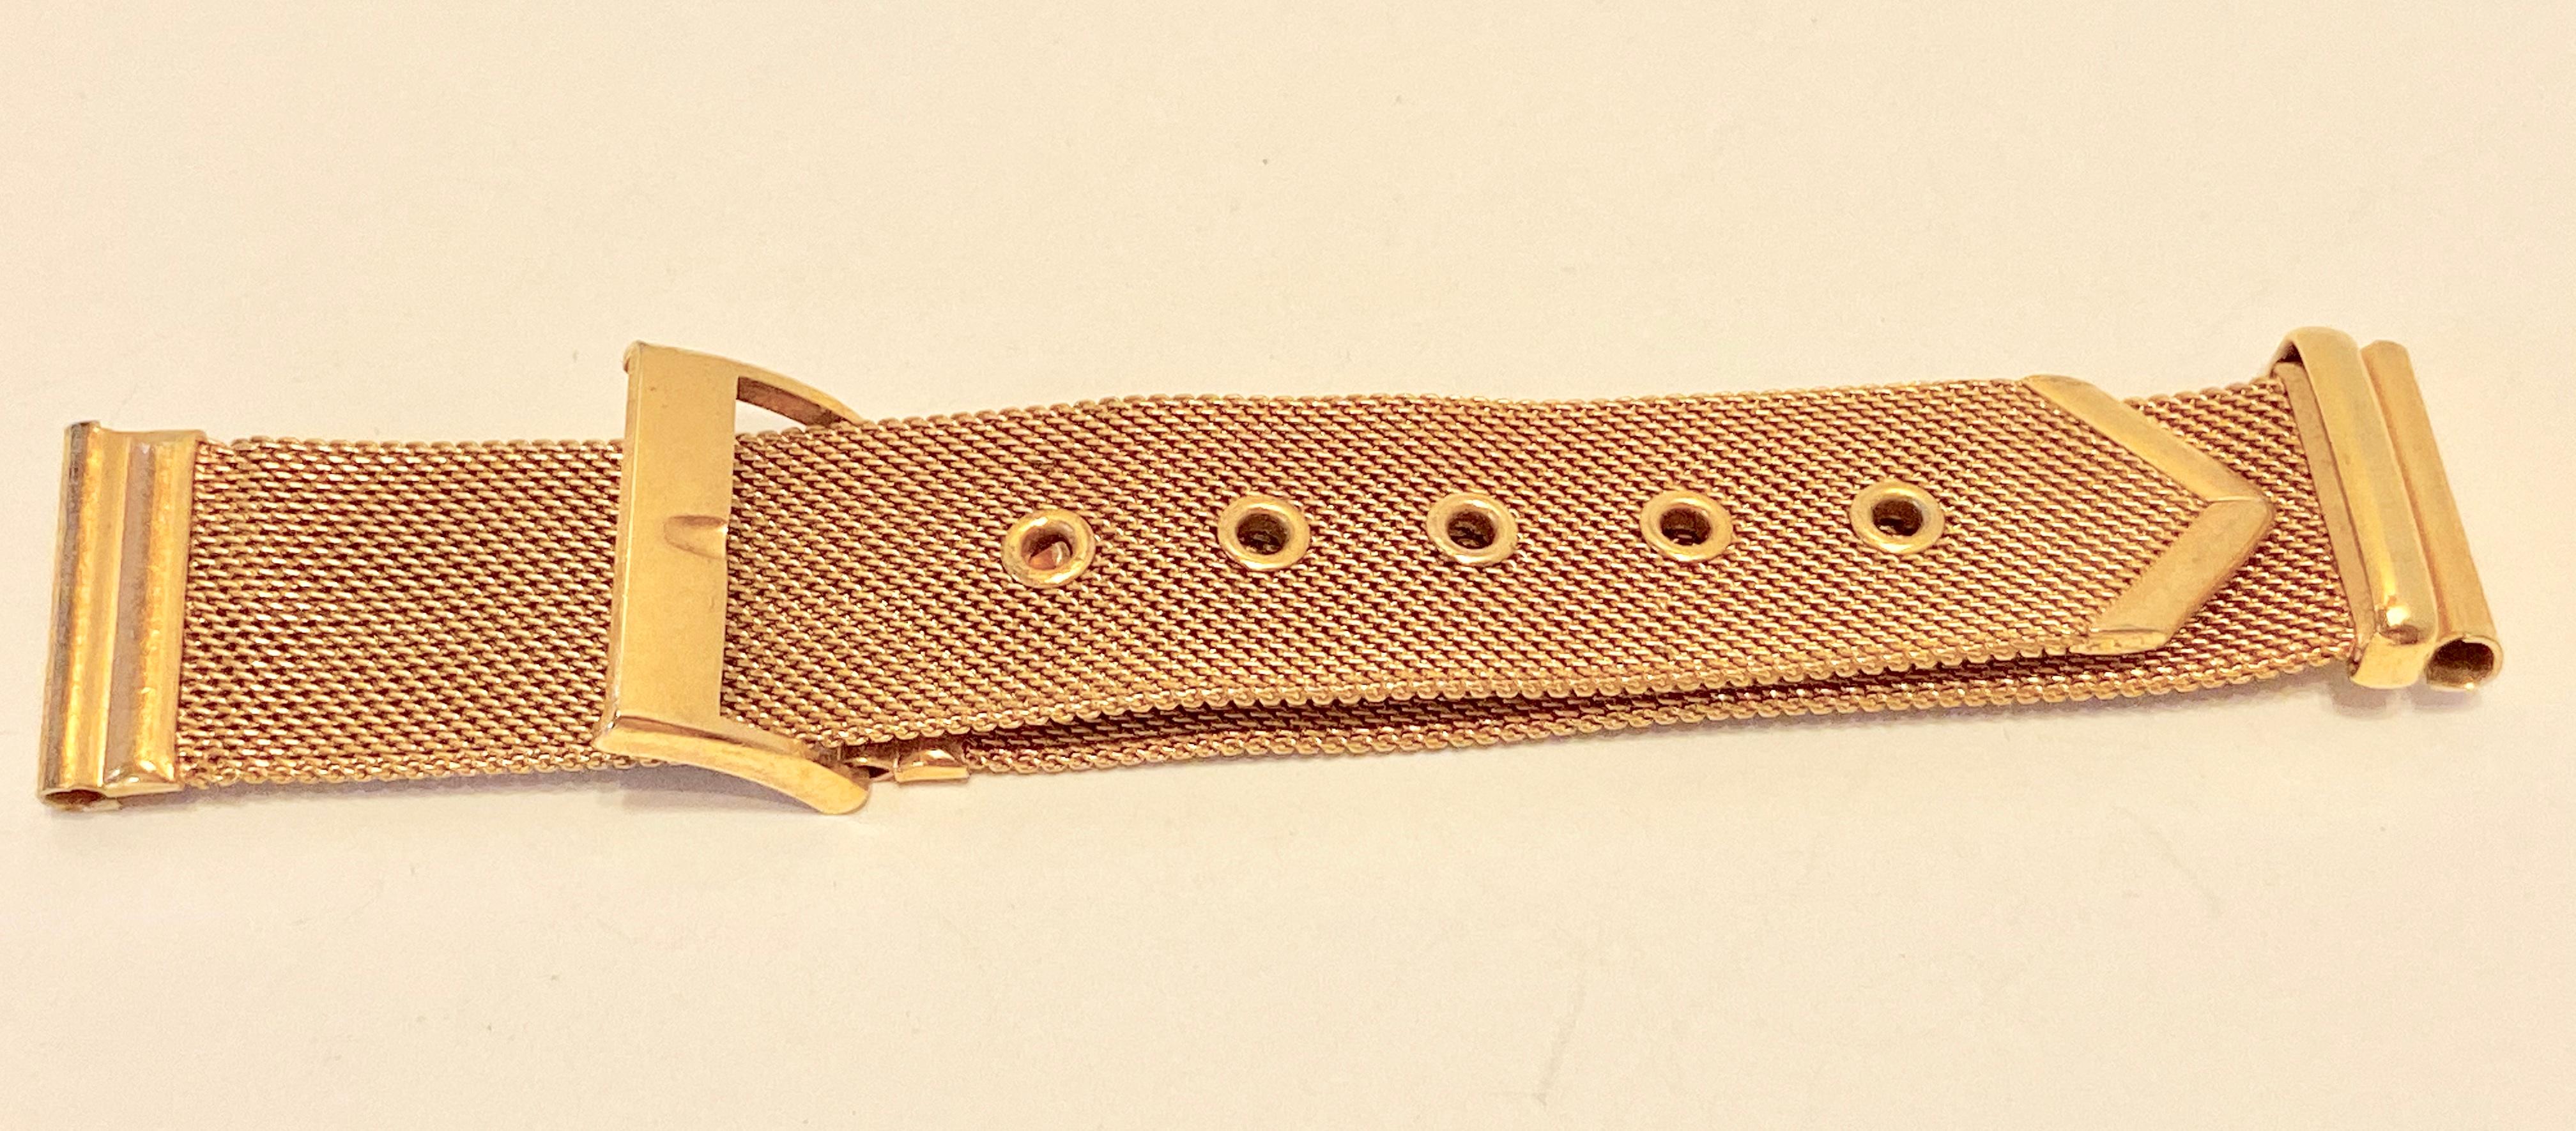 Micro Gold Hardware Mesh 'Buckle' Style Adjustable Watch Strap For Sale 2